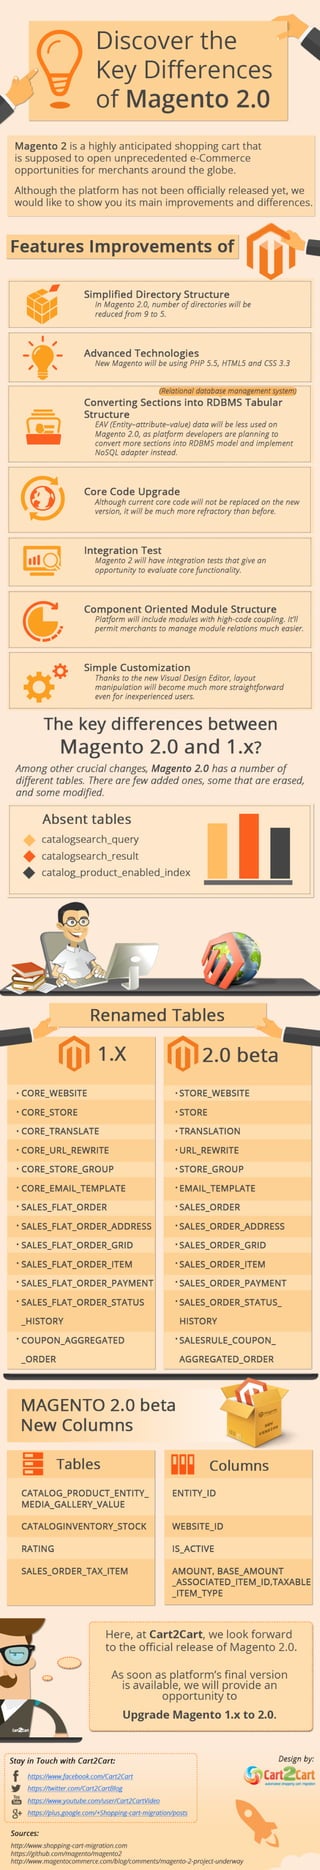 Discover the Key Differences of Magento 2.0